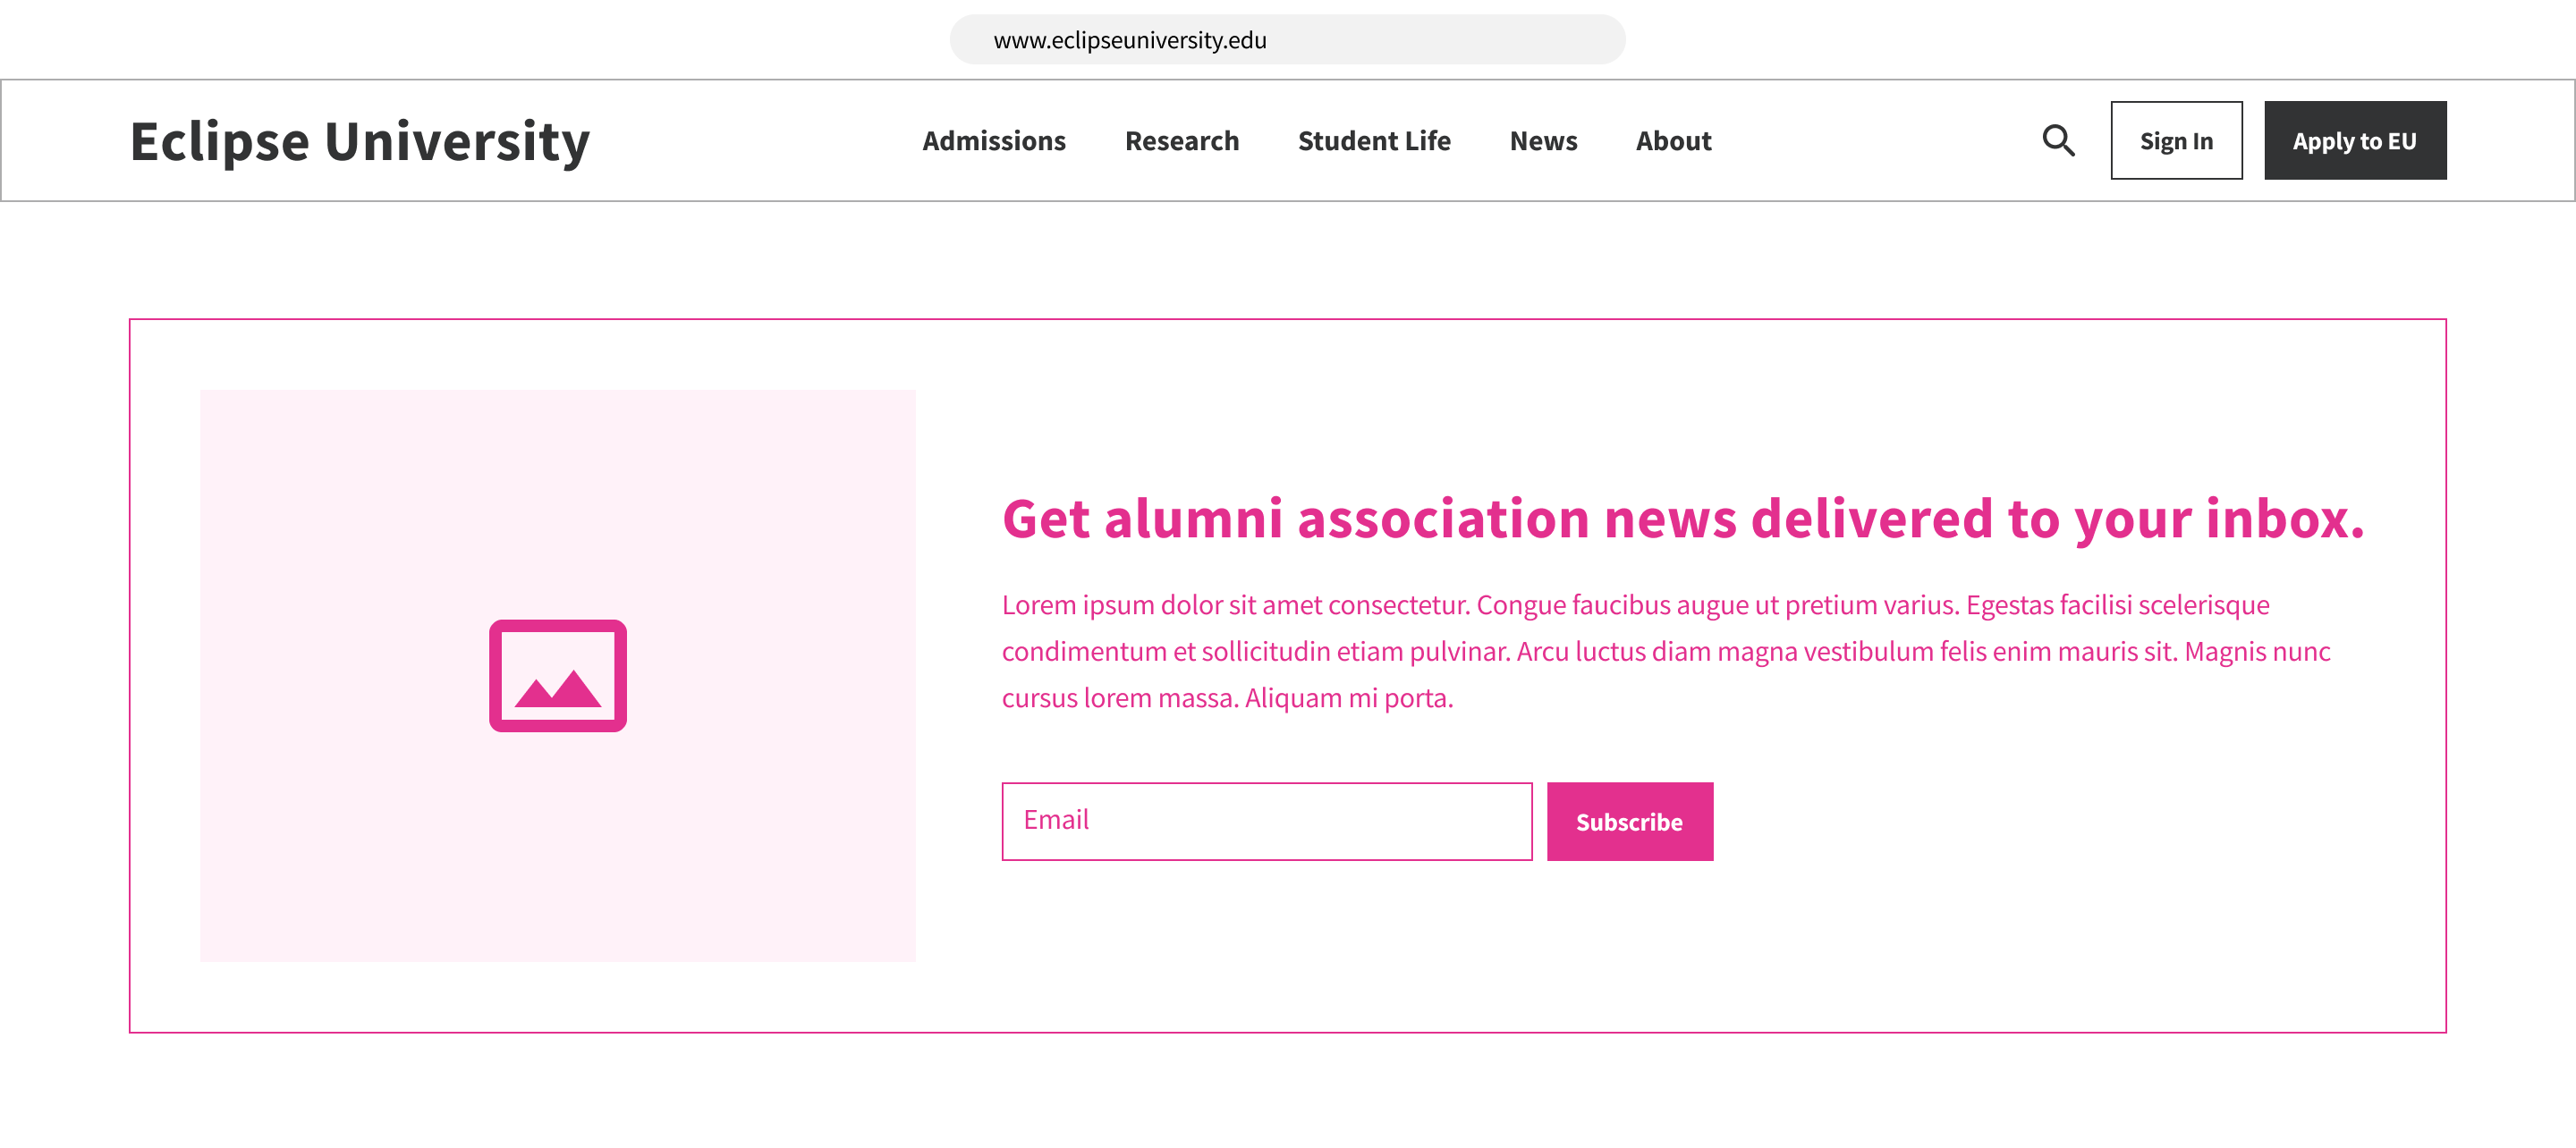 A wireframe of a 'Subscribe' form to receive alumni association news.